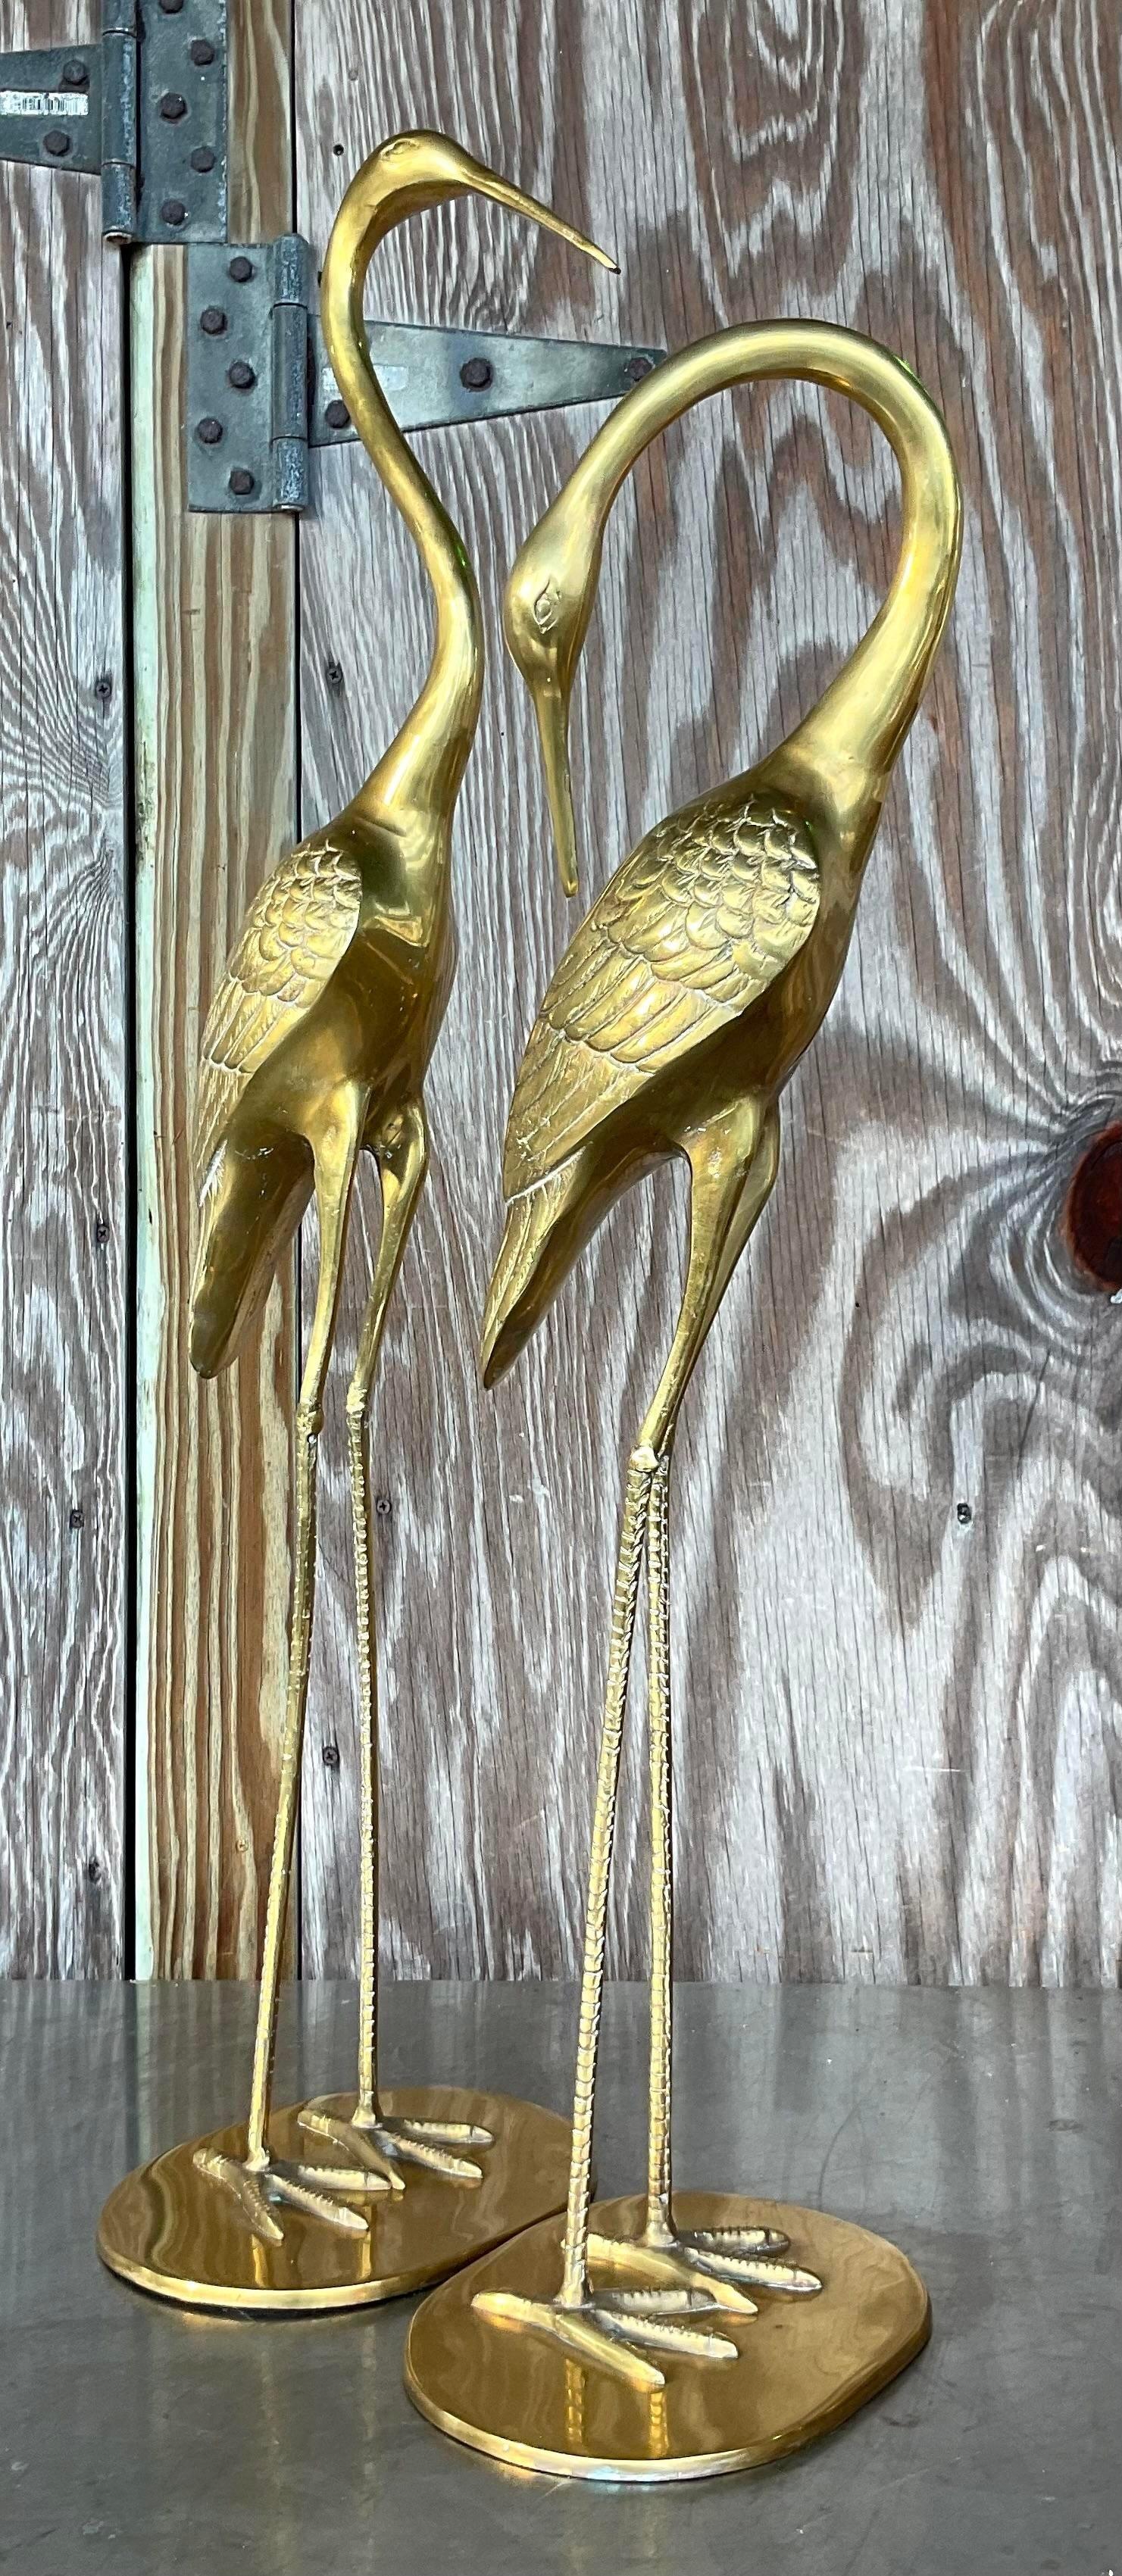 A sensational set of 2 large vintage Coastal cranes. A chic polished brass construction in a bright brass finish. Acquired from a Palm Beach estate.